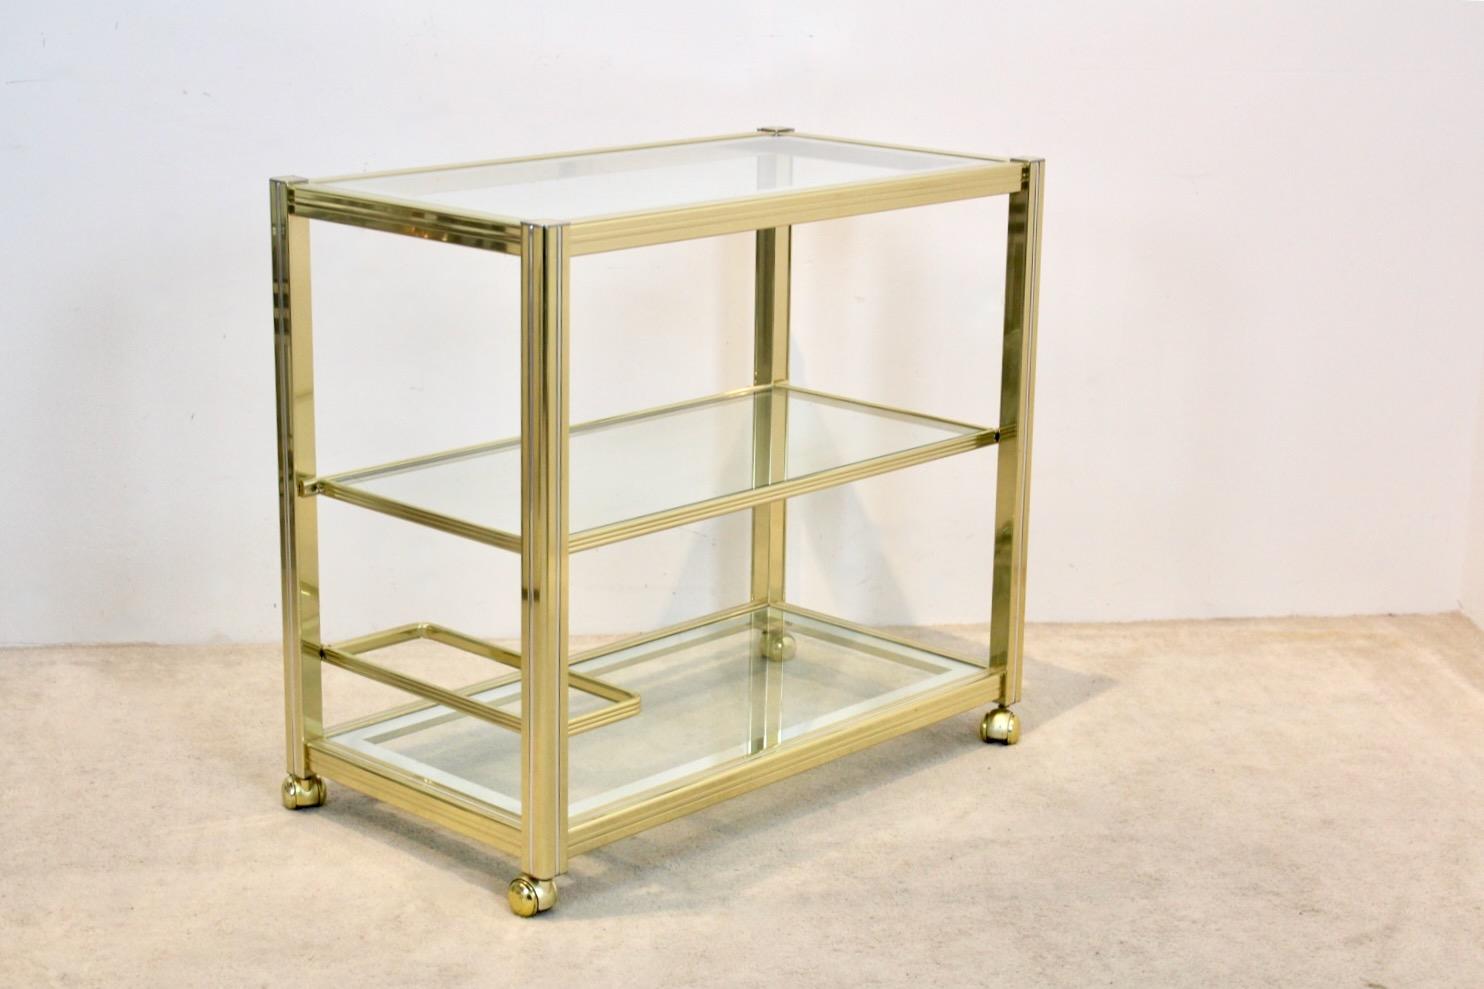 Extraordinary Pierre Vandel Brass and Chrome Bar Cart, France 1970s For Sale 3